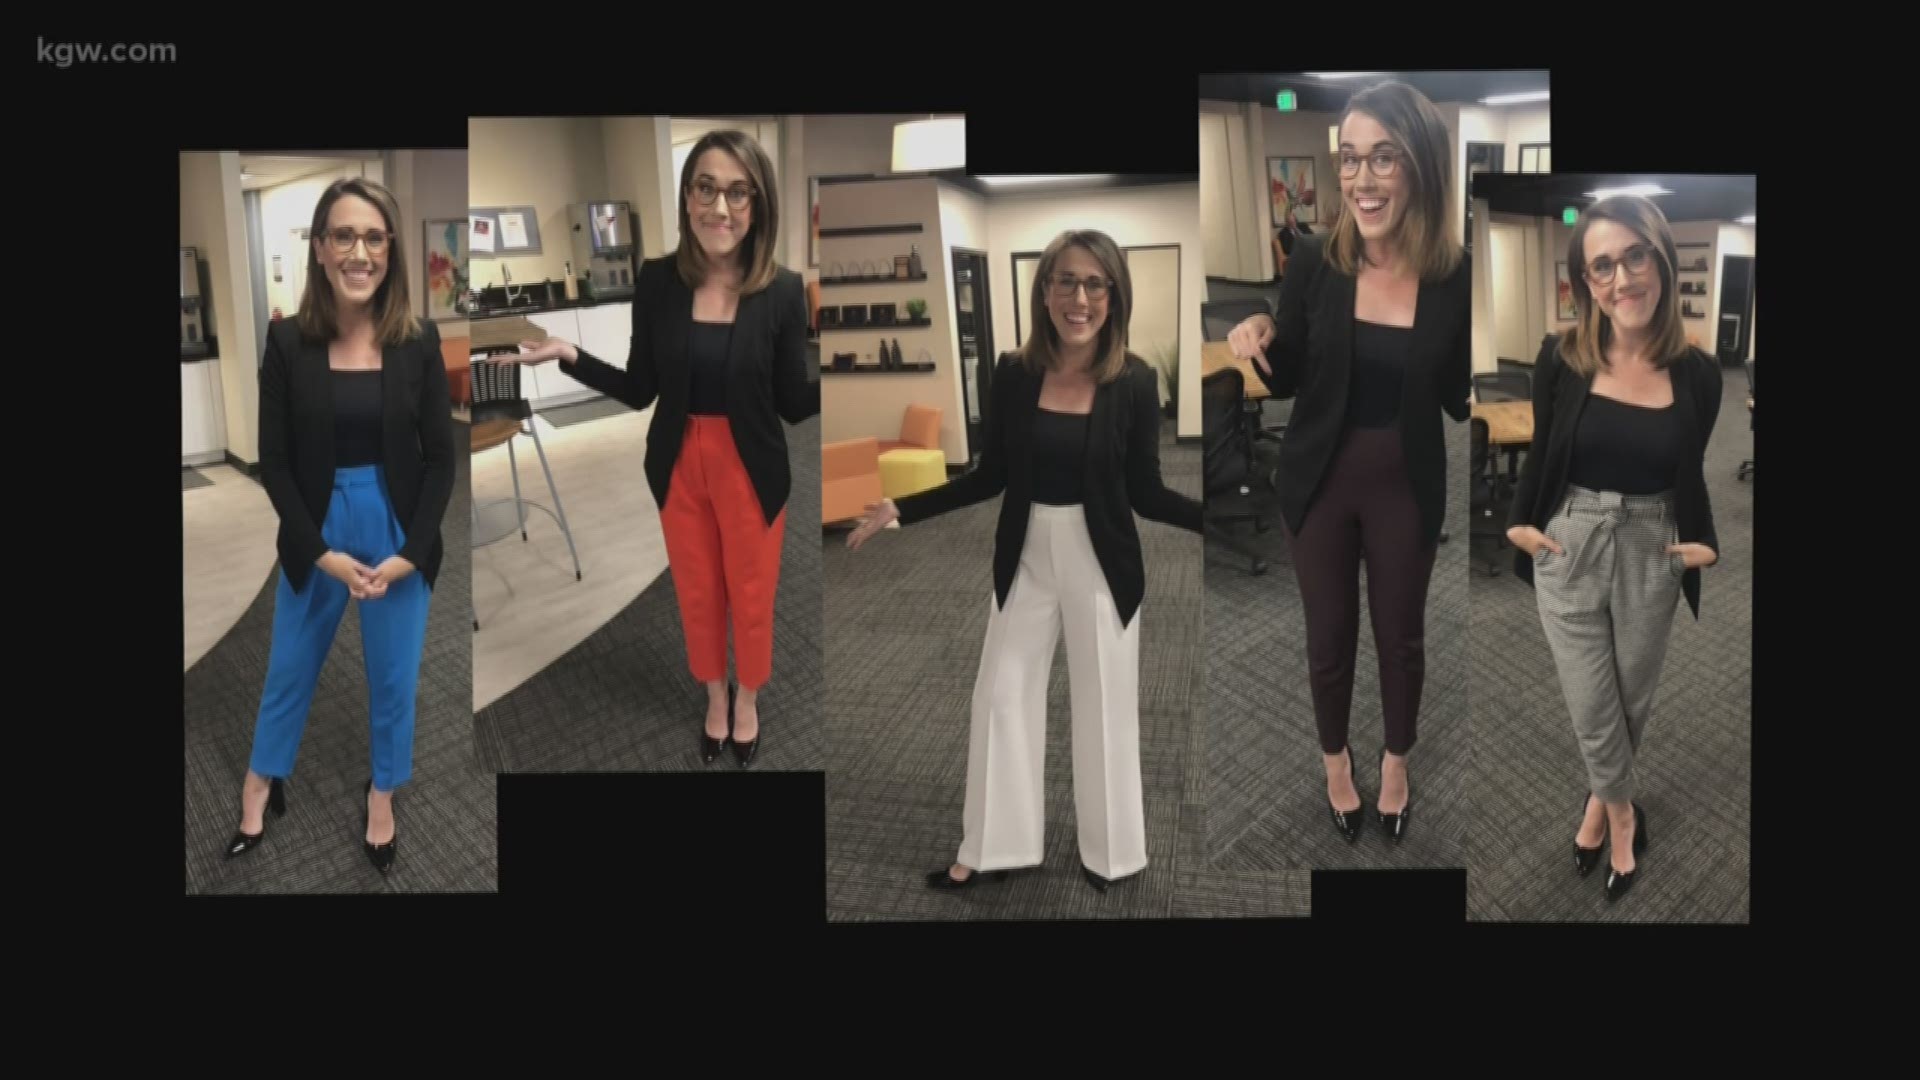 KGW reporter and anchor Maggie Vespa received feedback from a viewer last week telling her she "looks foolish" for wearing high-wasted panted. The viewer doubled down a few days later and messaged Maggie while she was on live TV, again about her clothing and telling her to "dress like a normal woman." In a Sunday evening segment, Maggie talked about why there is no one way for a "normal woman" to dress.